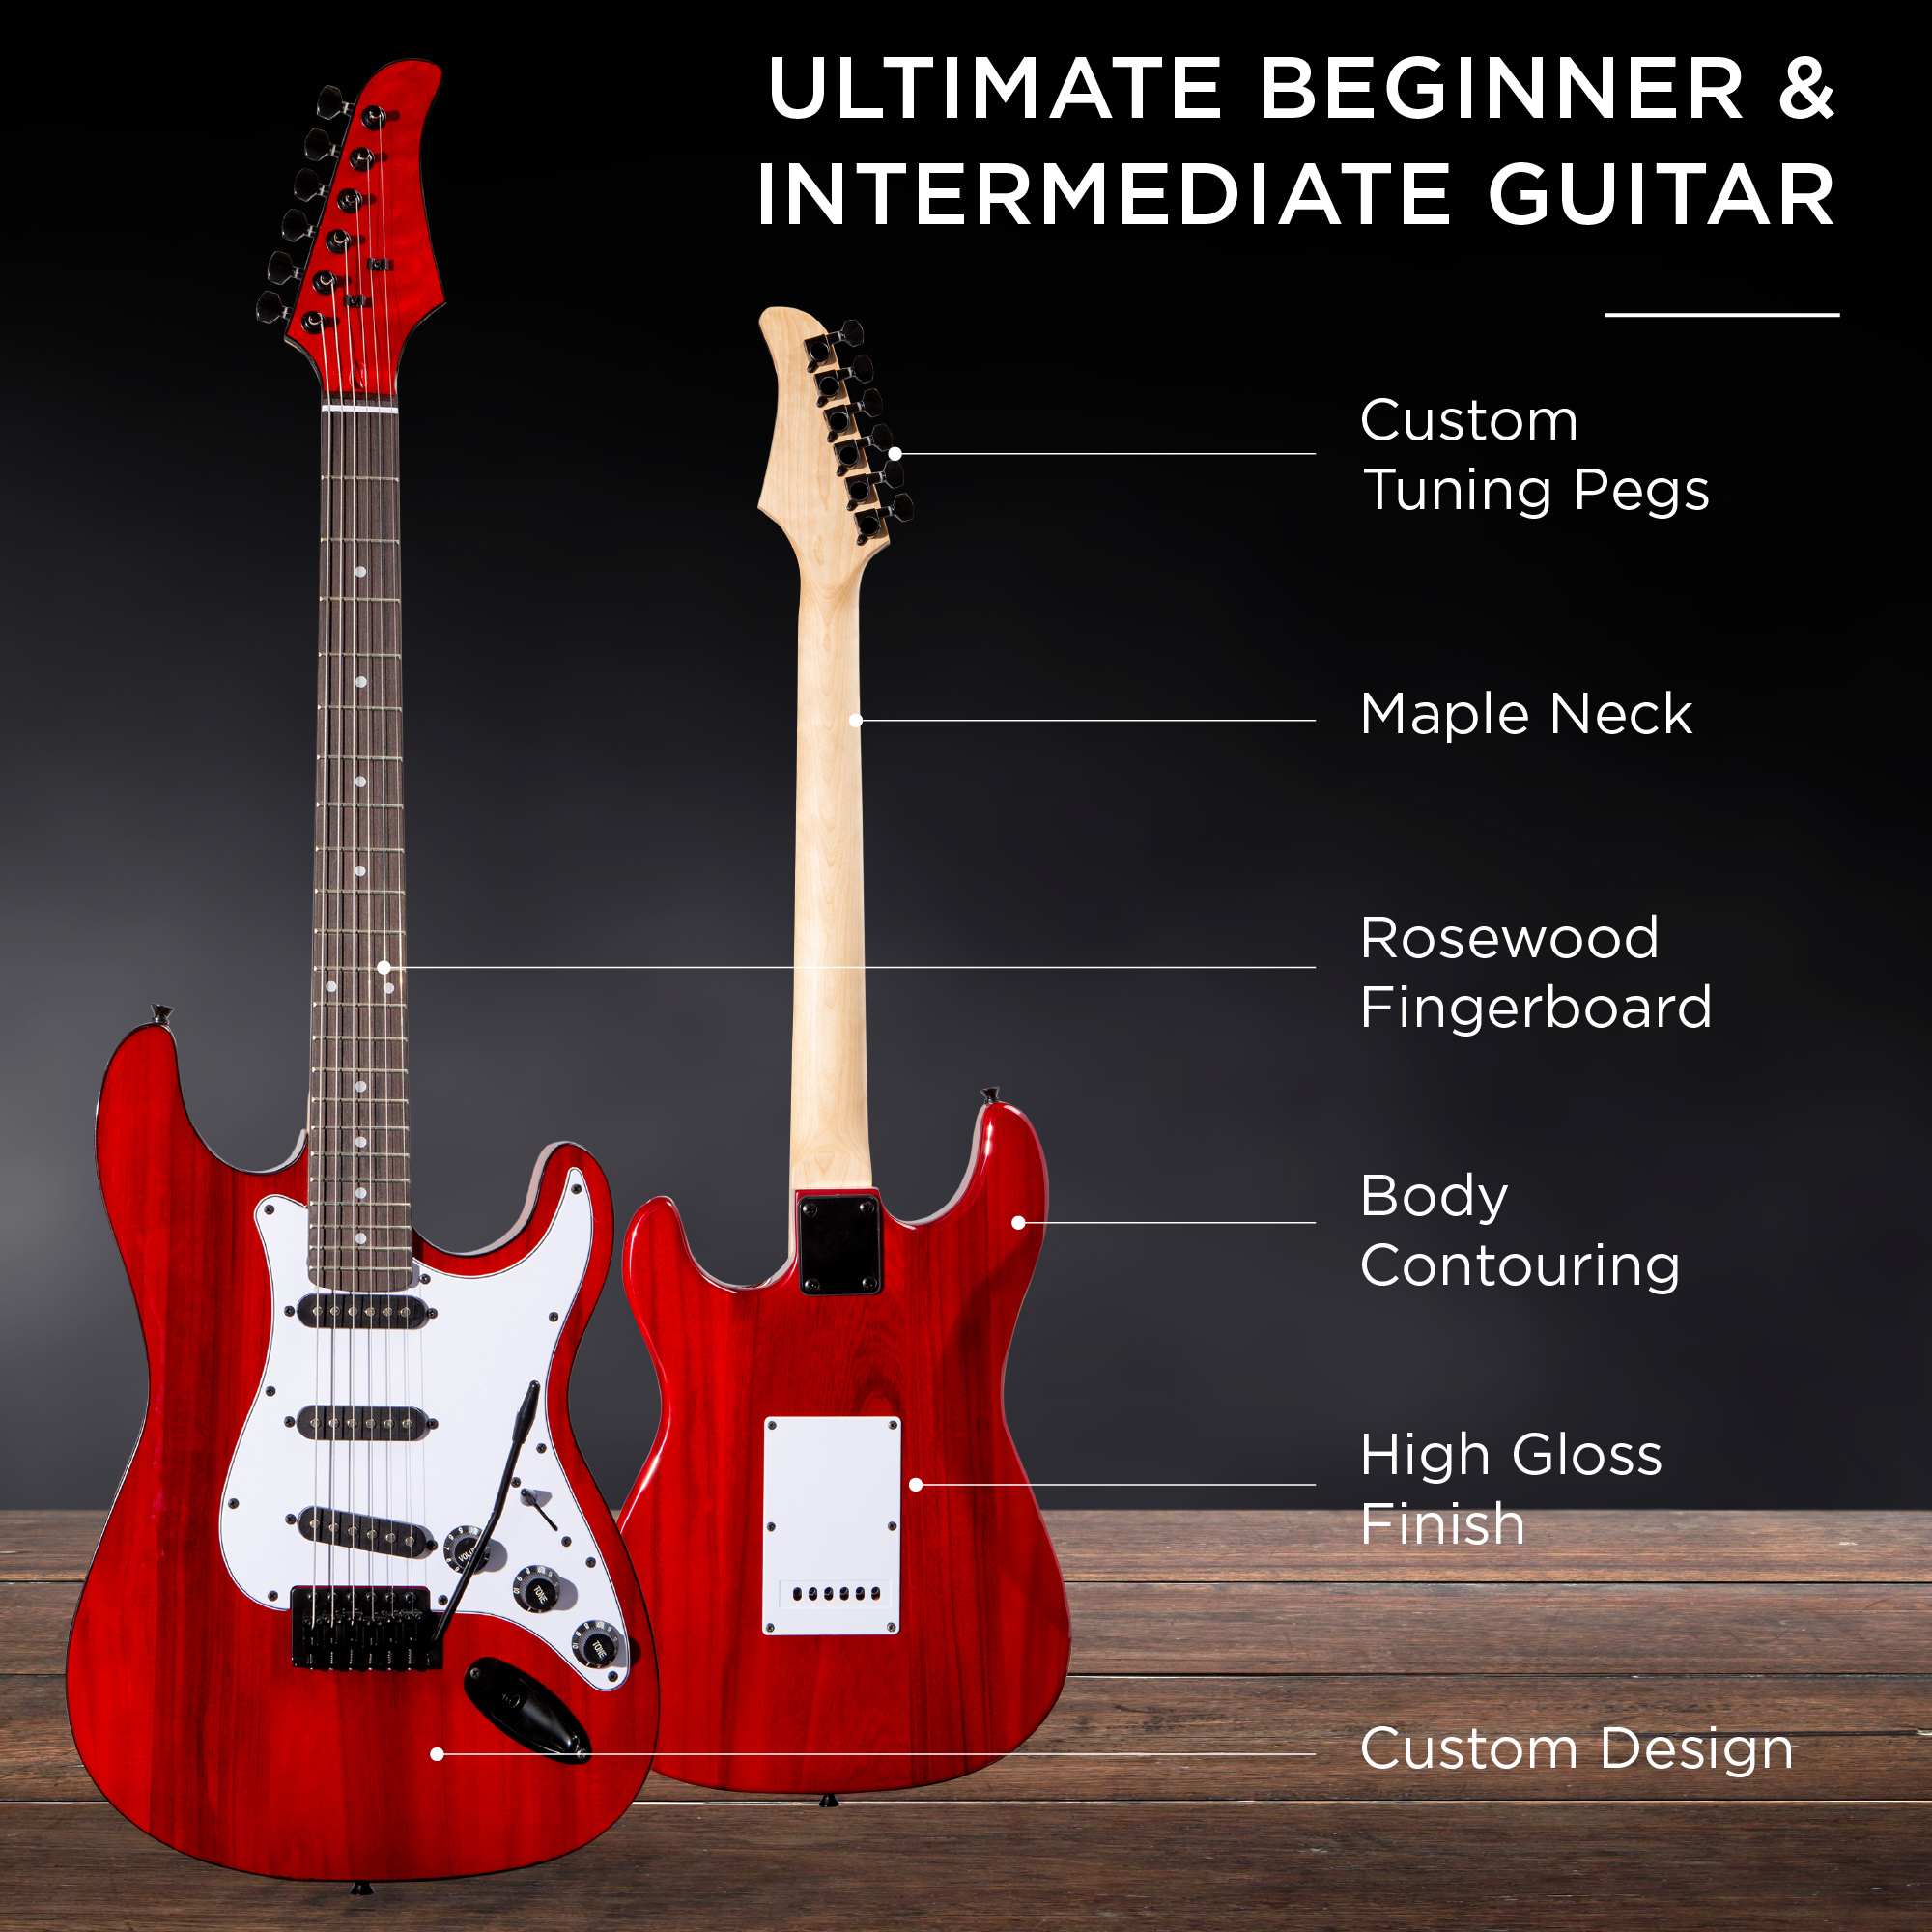 Best Choice Products 39in Full Size Beginner Electric Guitar Kit with Case, Strap, Amp, Whammy Bar - Cherry Red - image 3 of 6